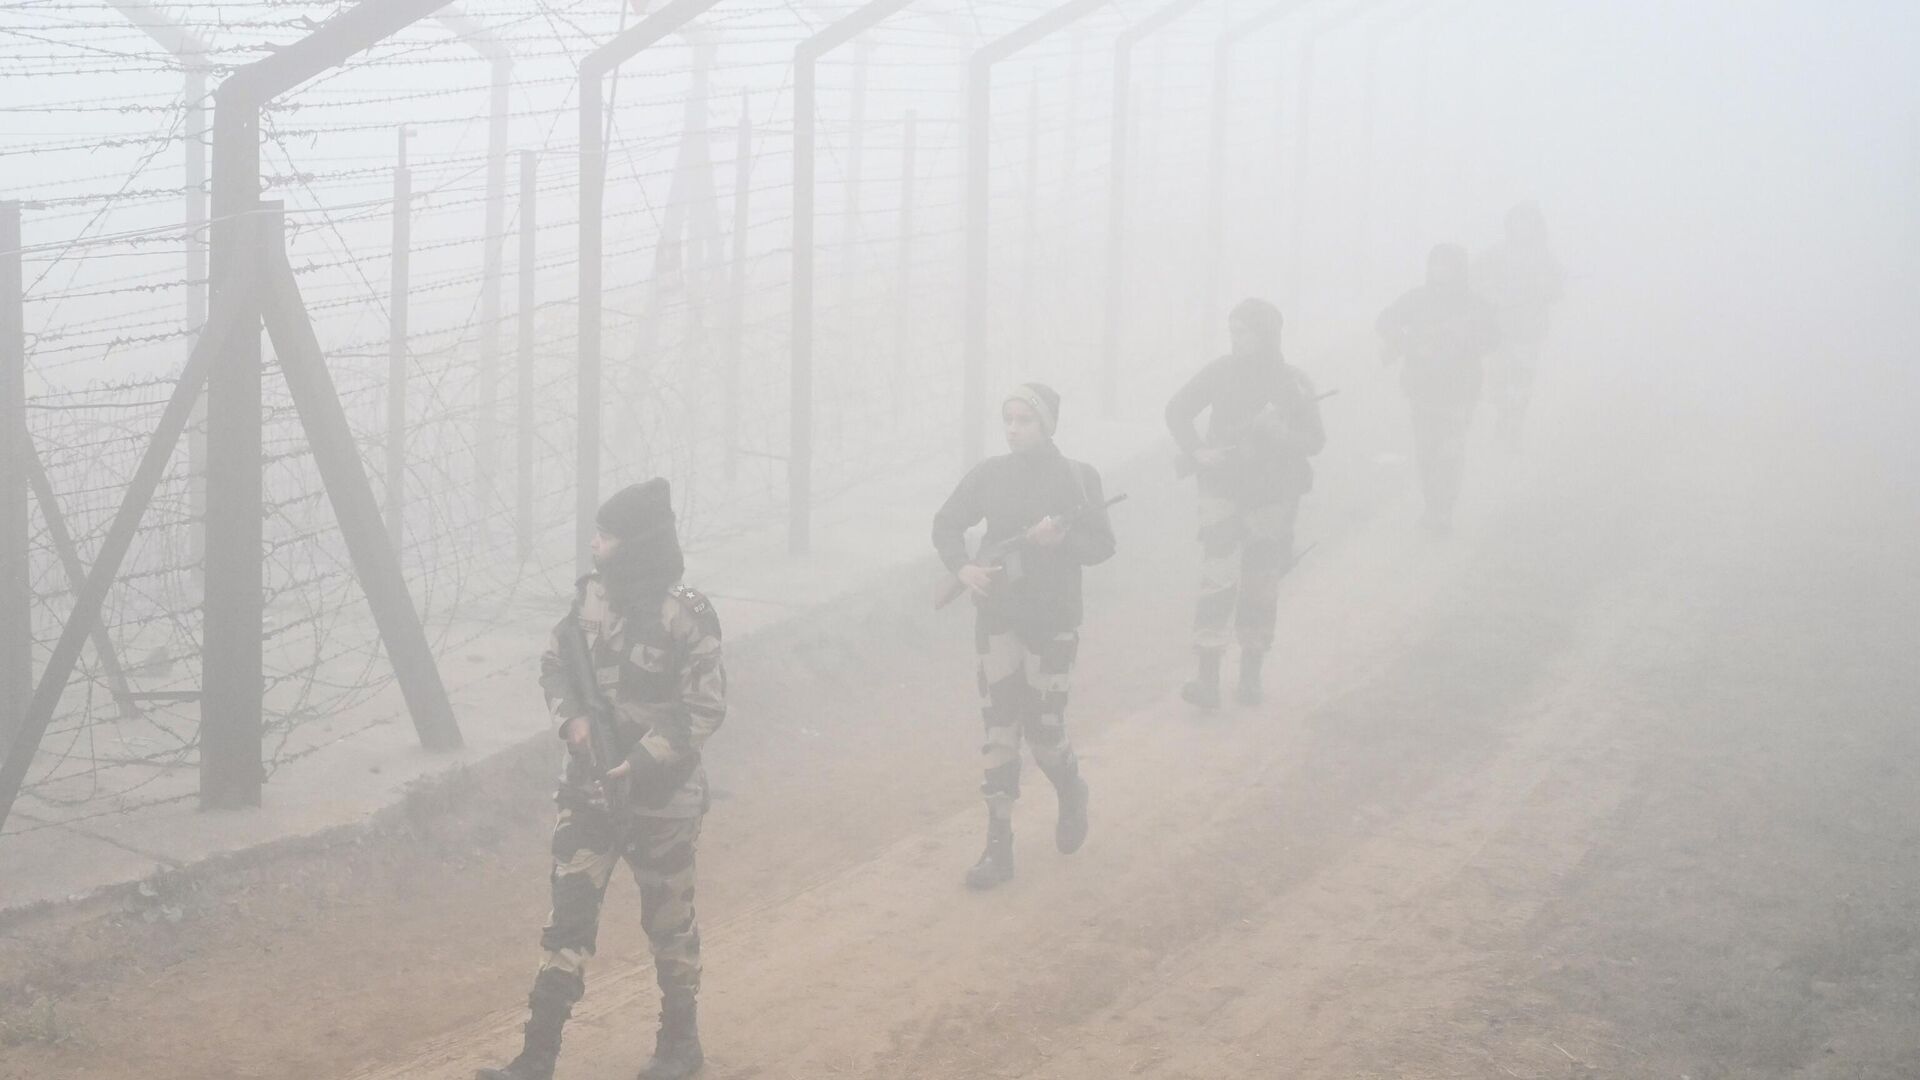 Border Security Force (BSF) personnel patrol along the border fence during a cold foggy morning near India-Pakistan Wagah border about 40km from Amritsar on December 21, 2022 - Sputnik India, 1920, 03.01.2023